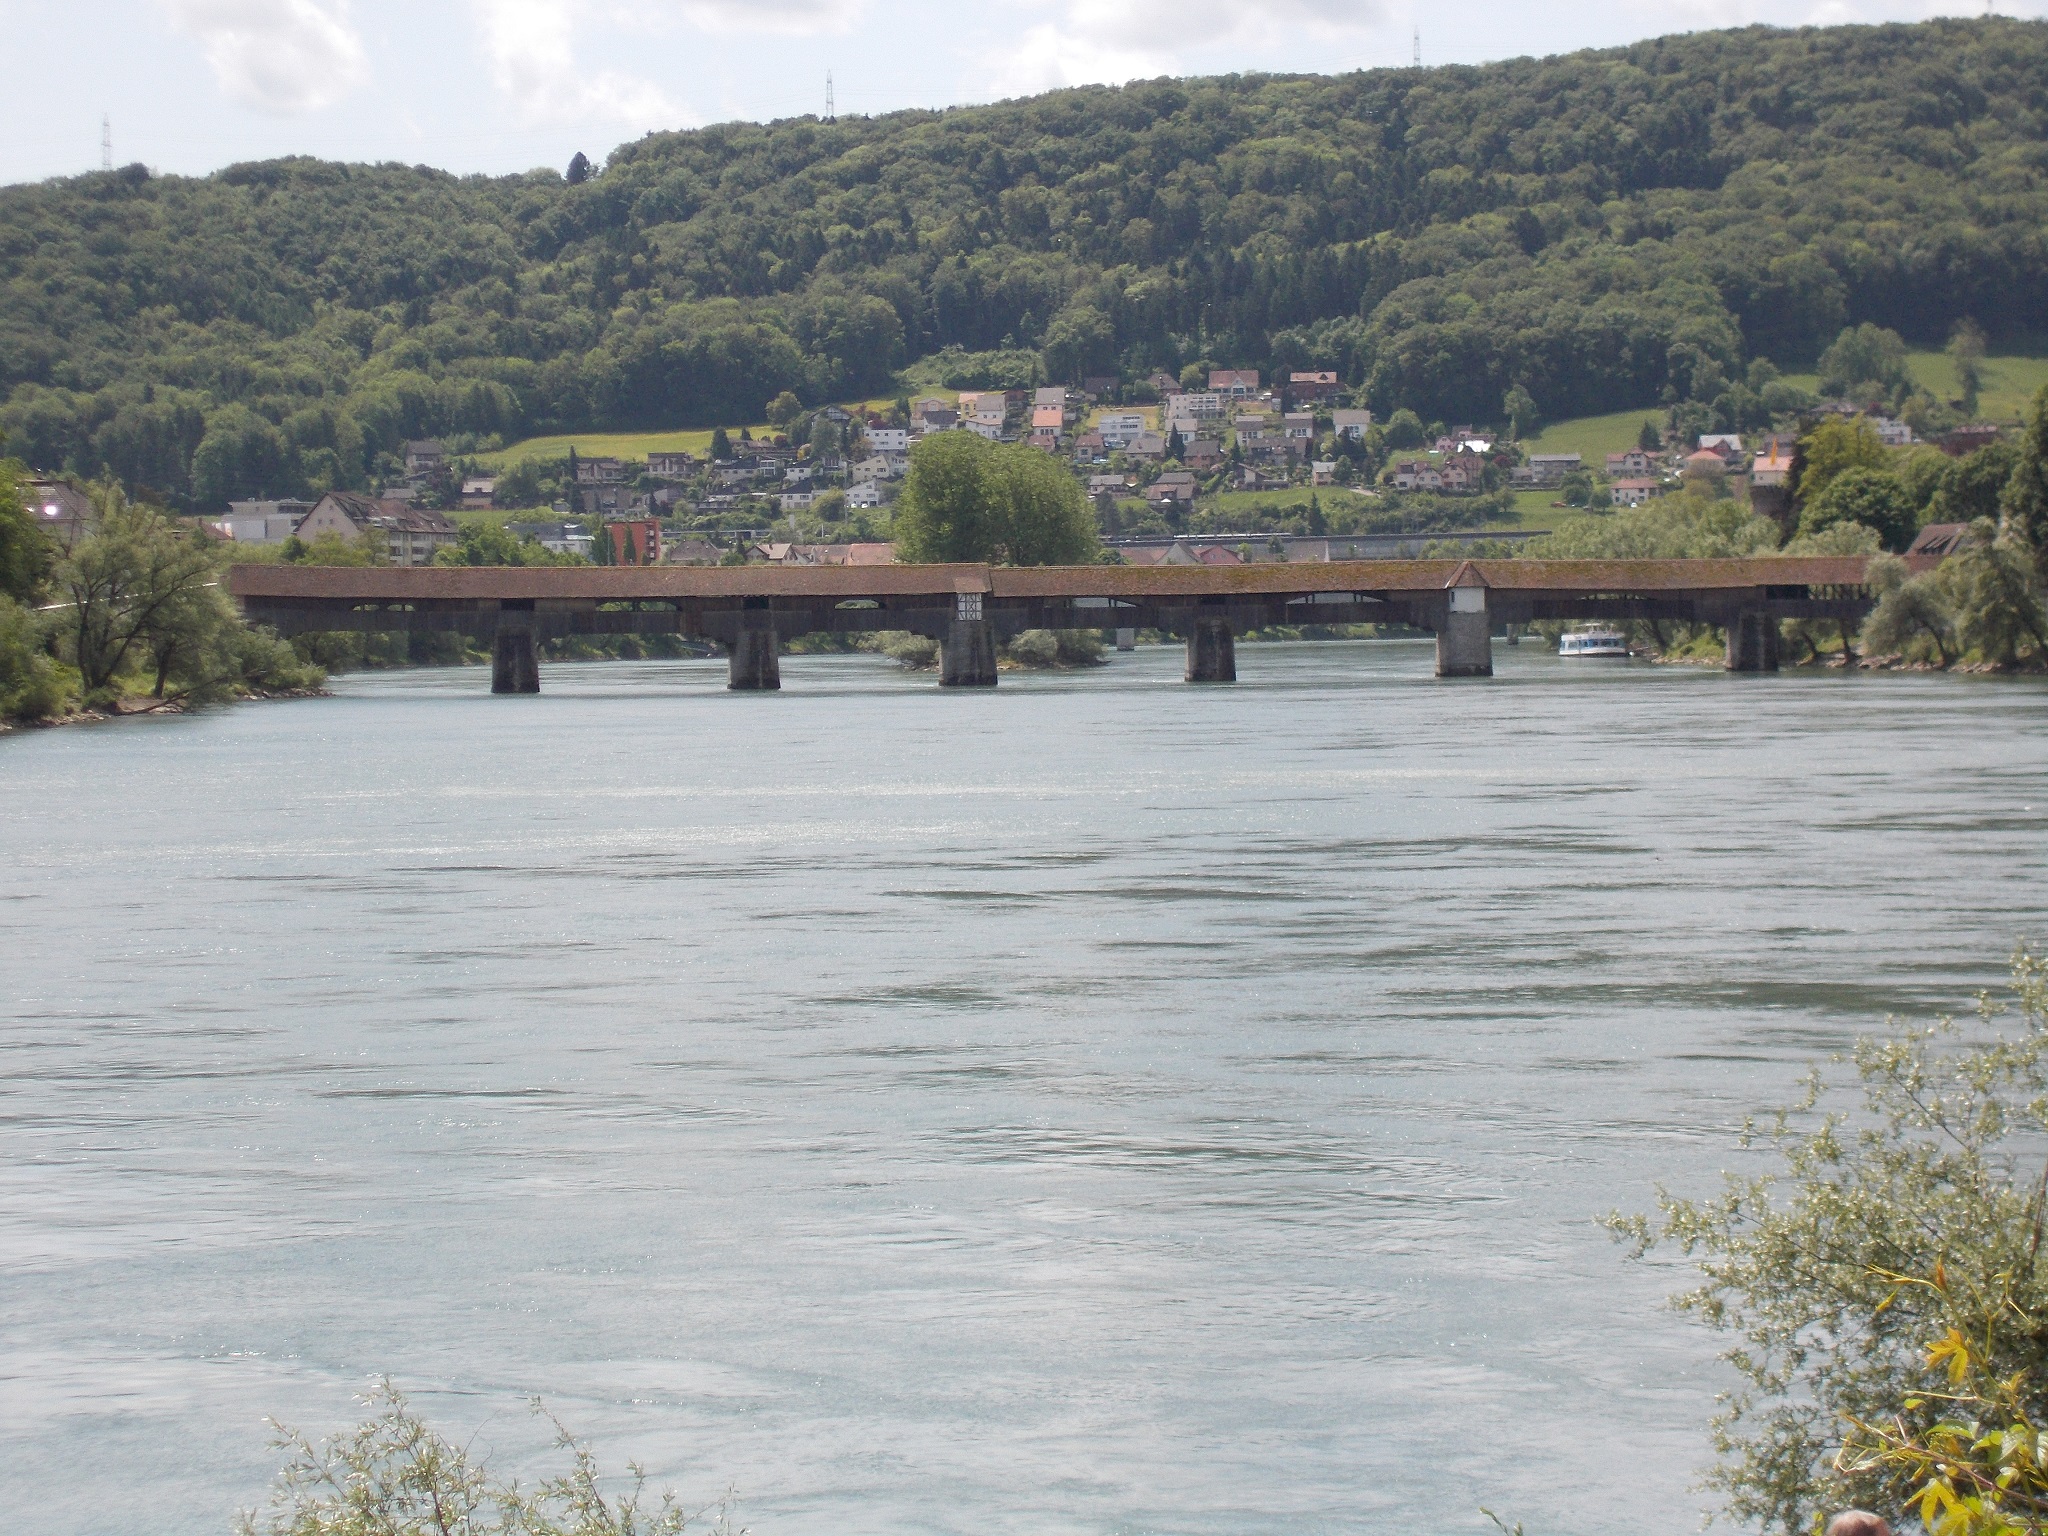 A very long covered bridge spanning the Rhine river with a town in the background.